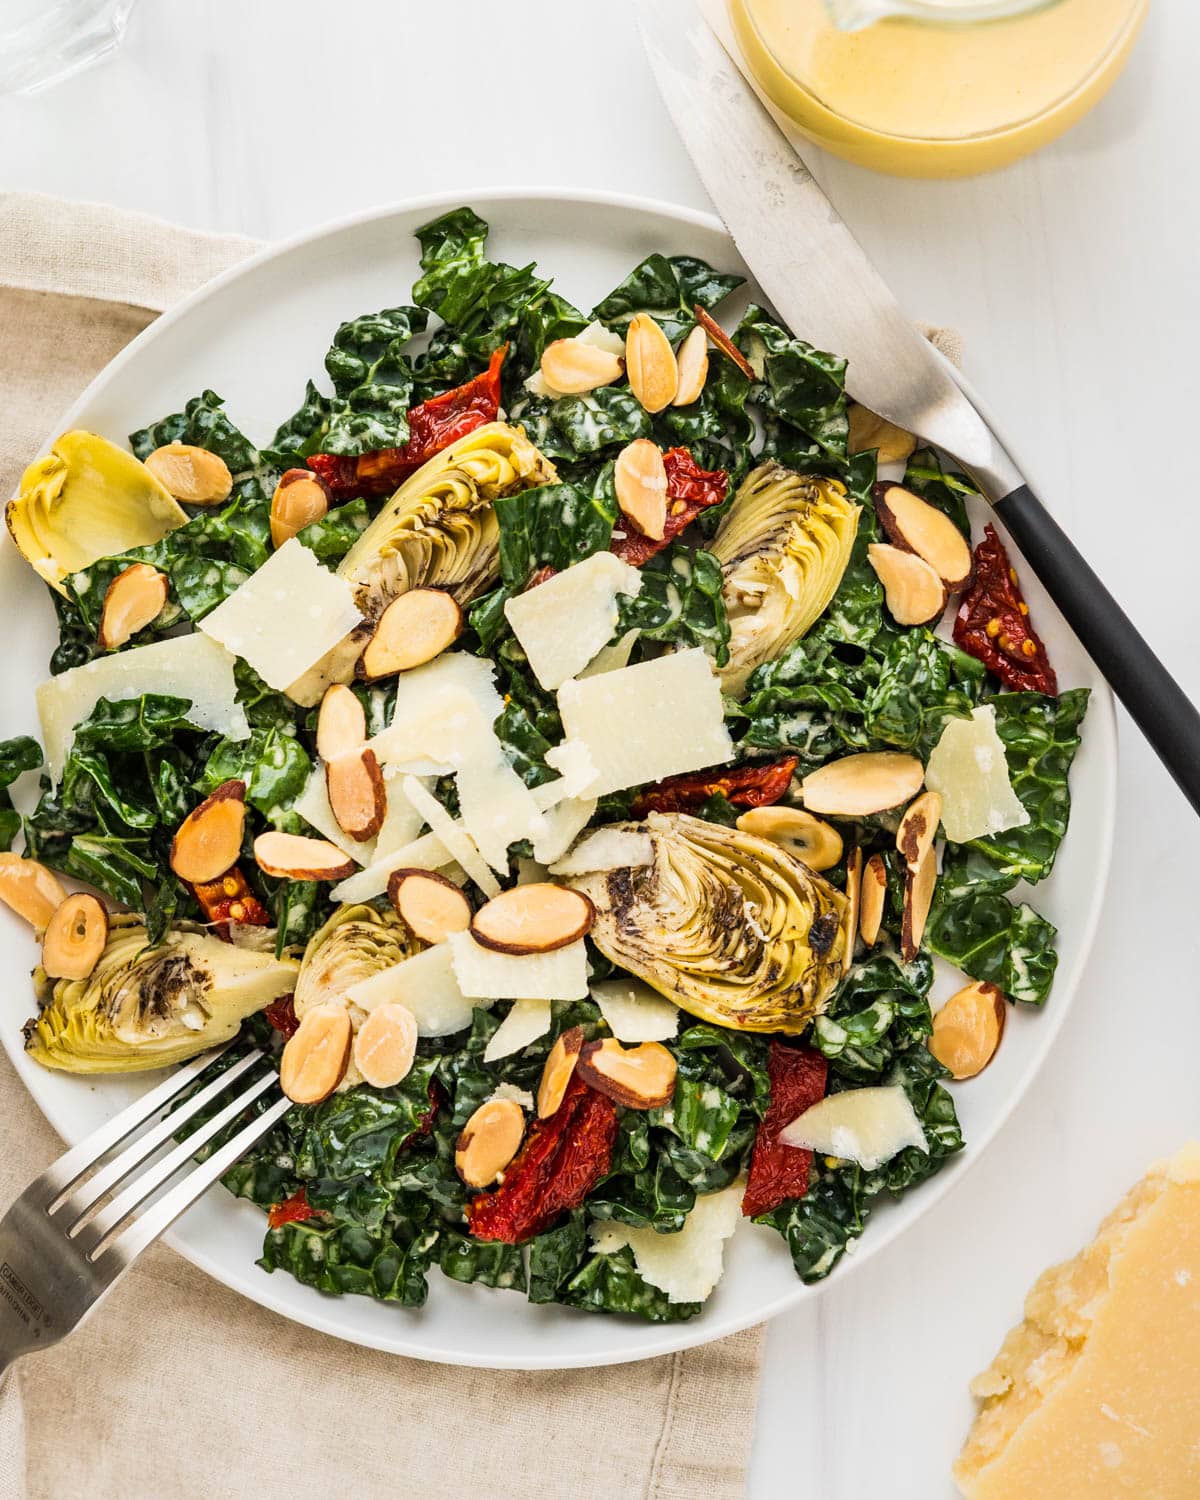 A salad made with kale, artichokes and cheese.